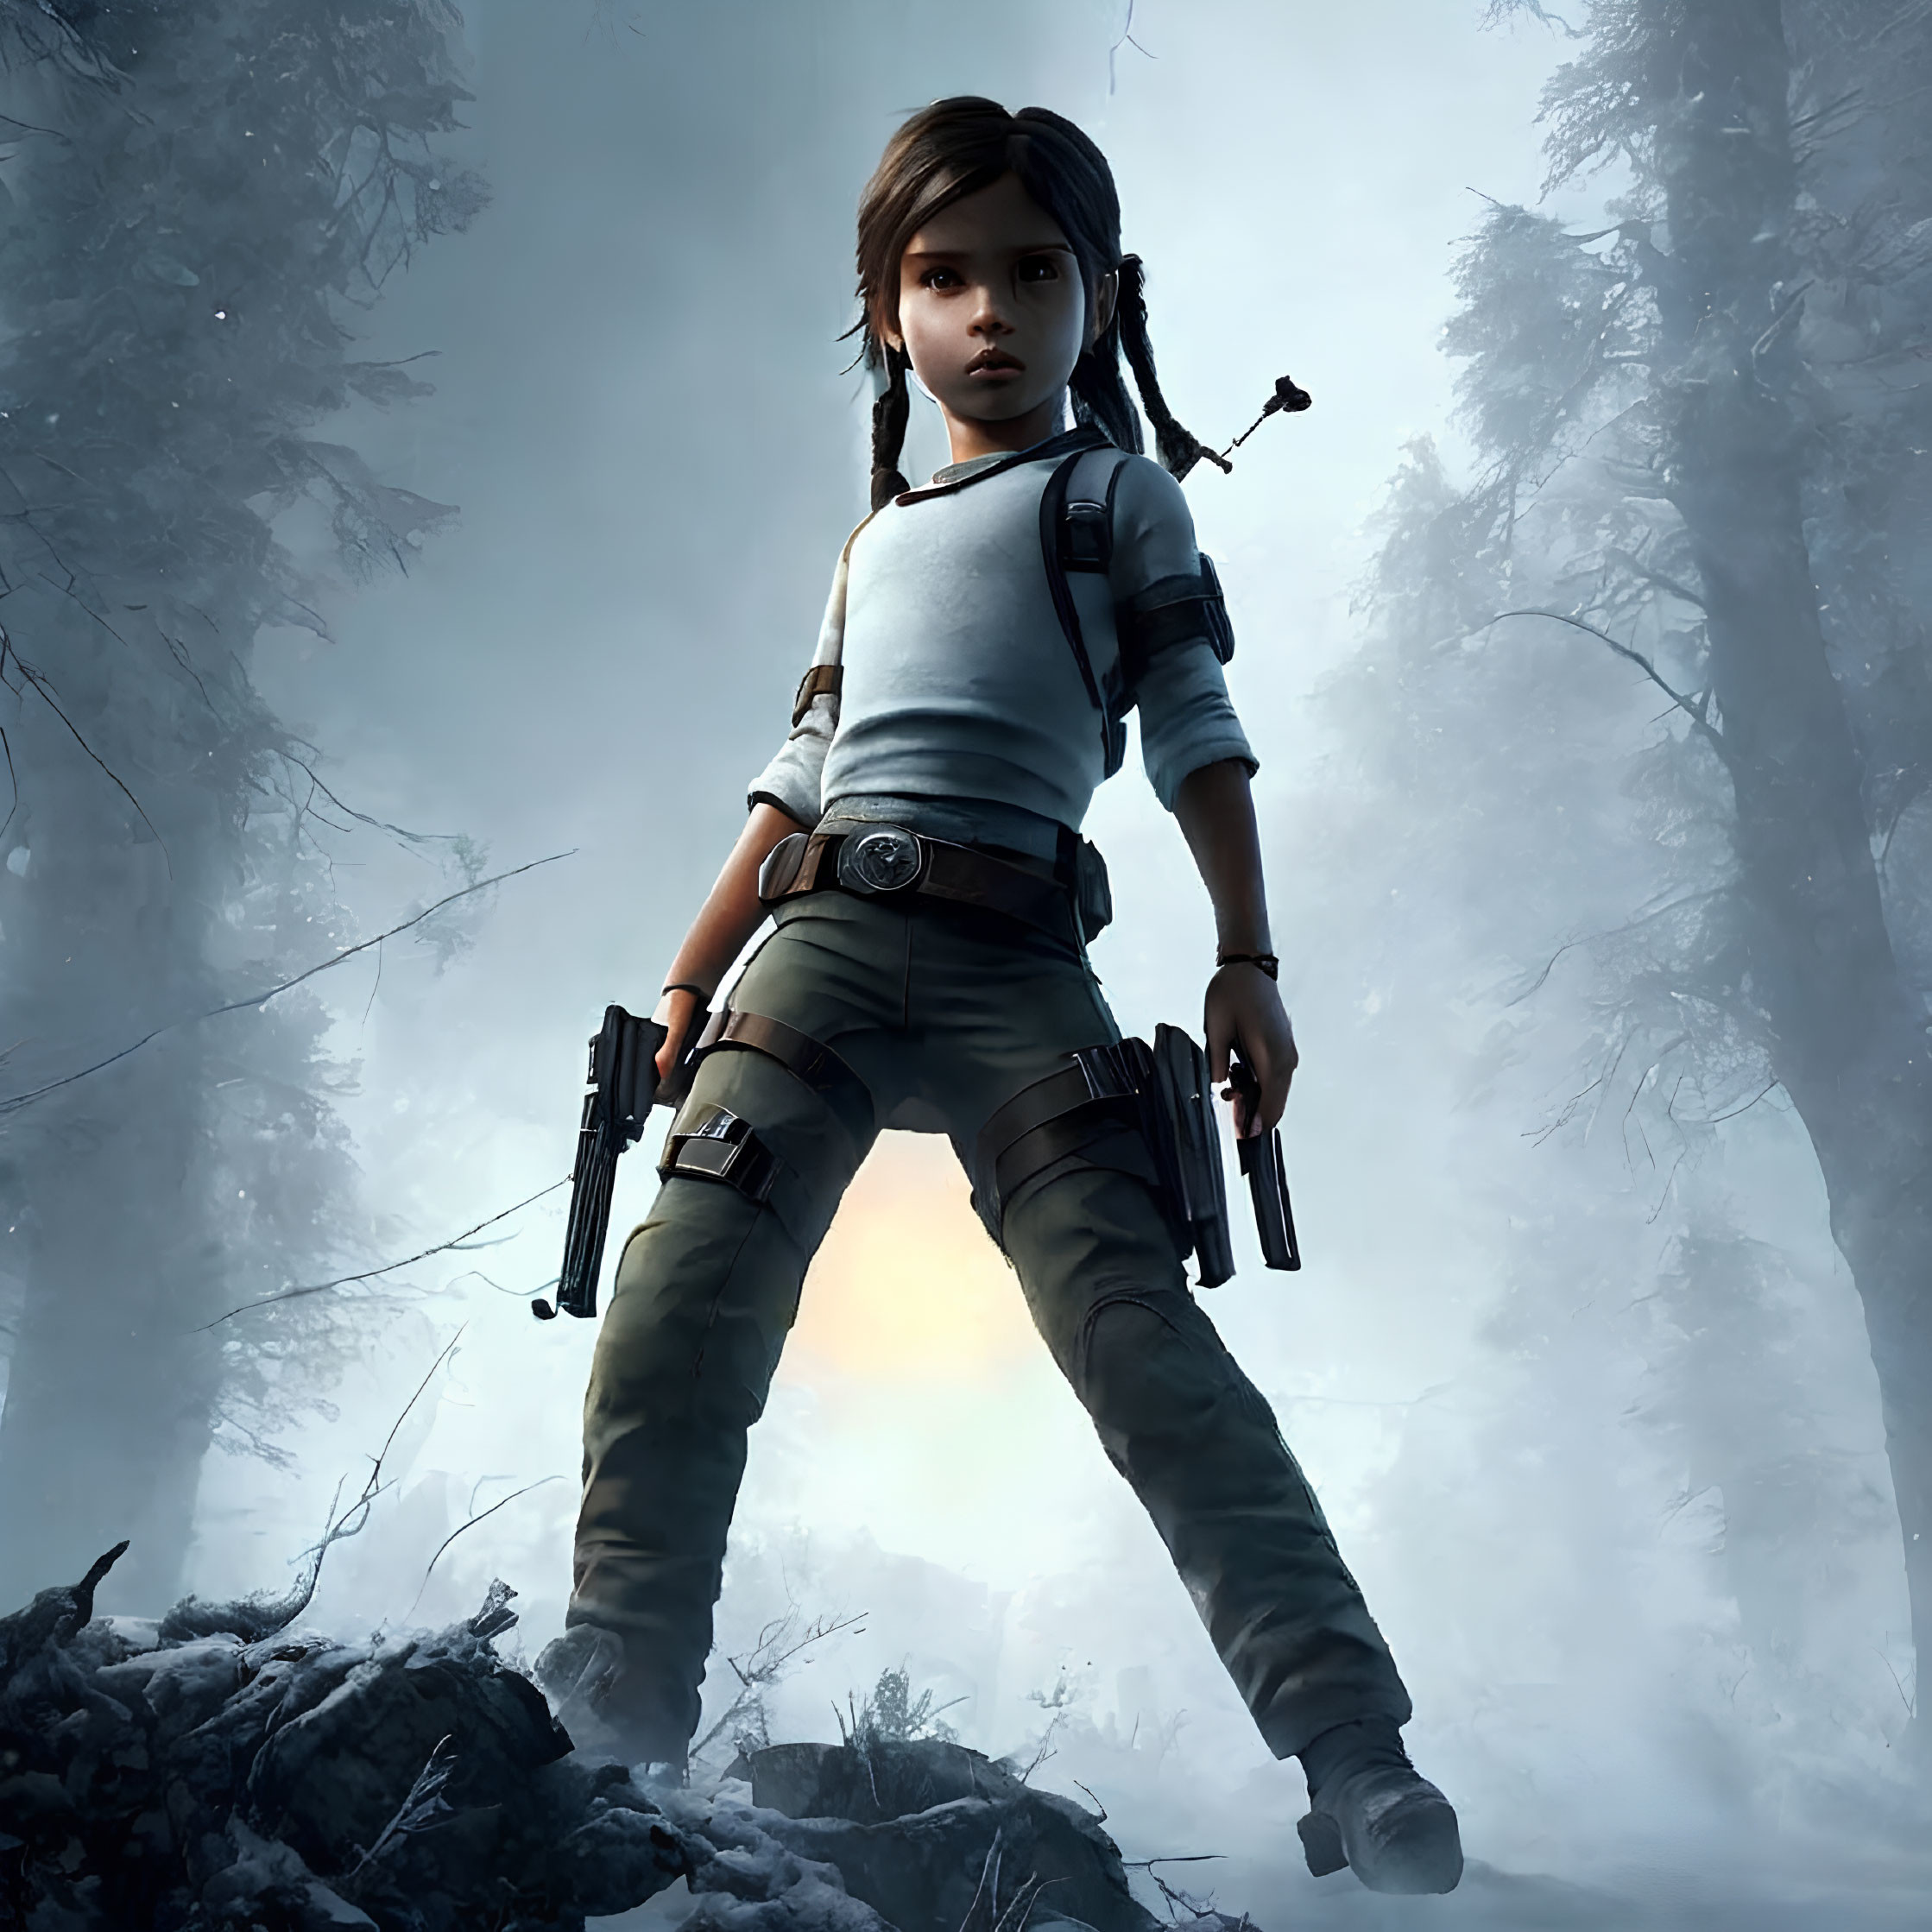 Confident young girl in snowy forest with holster and gun wearing blue shirt and cargo pants